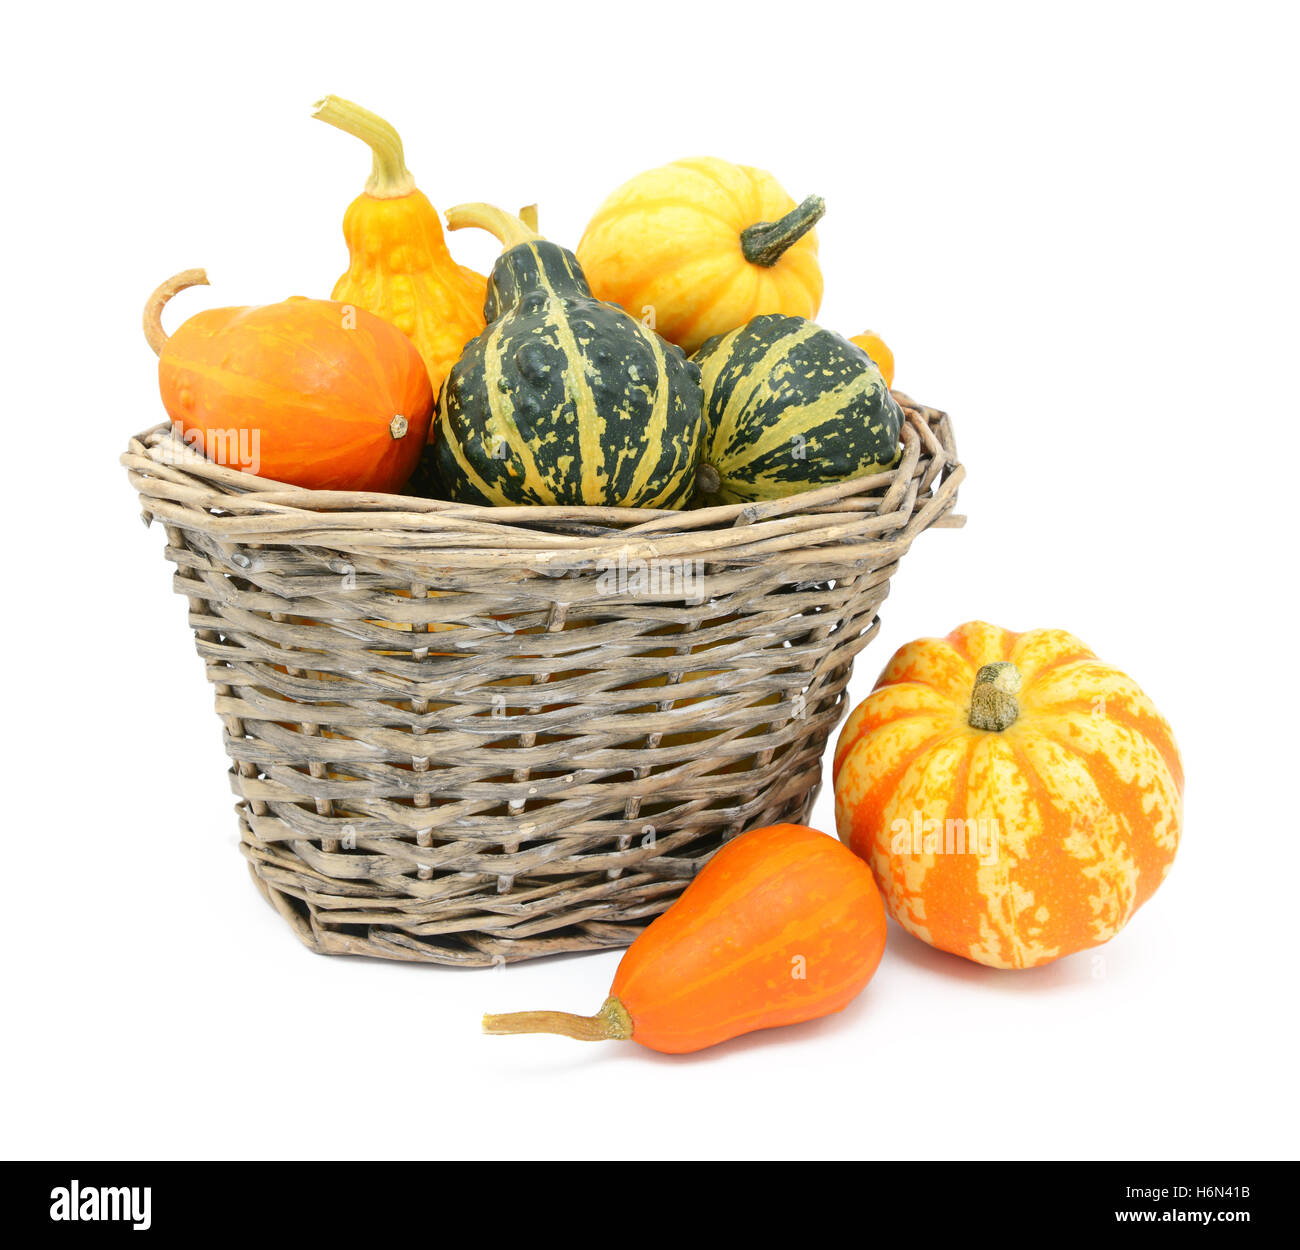 Selection of green, orange and yellow ornamental gourds in a rustic woven basket, two squash lie beside Stock Photo